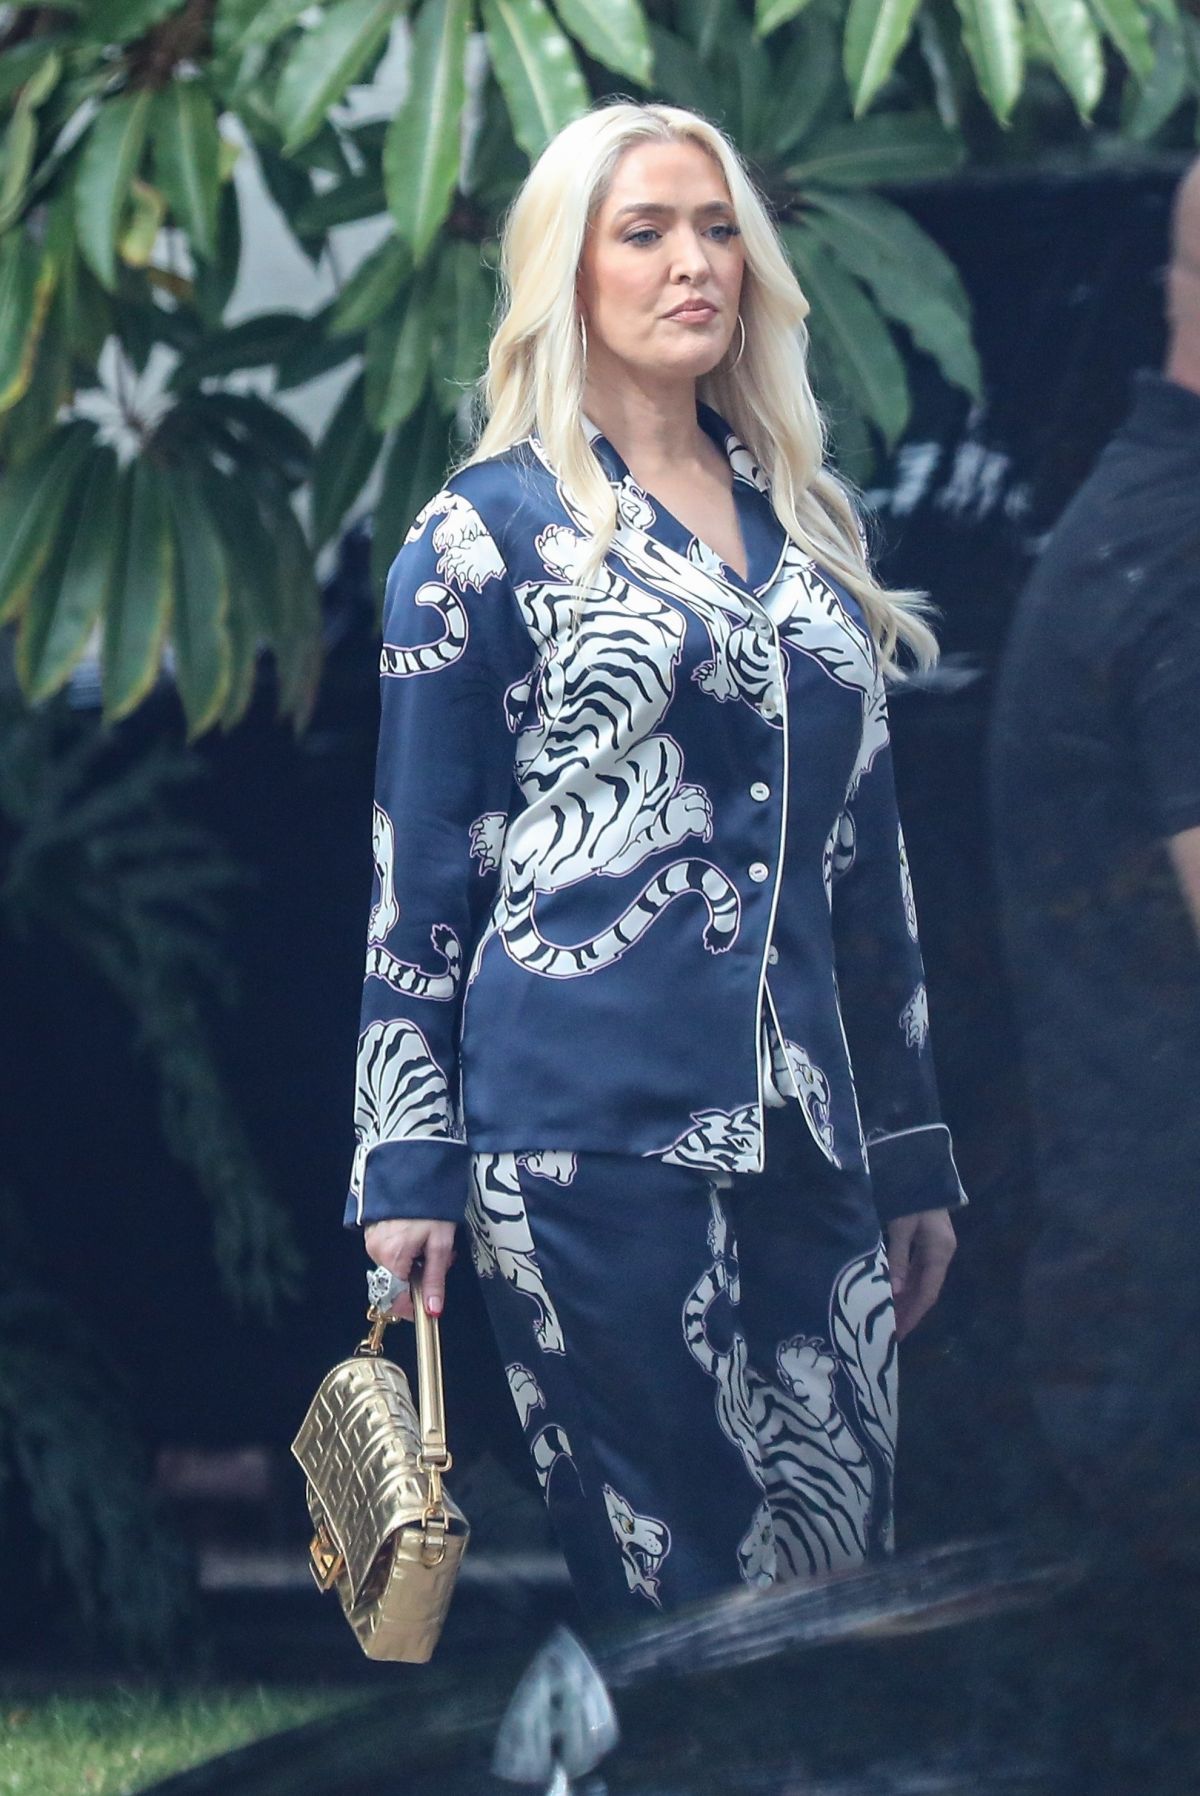 ERIKA JAYNE Out and About in Bel Air 10/22/2021 – HawtCelebs